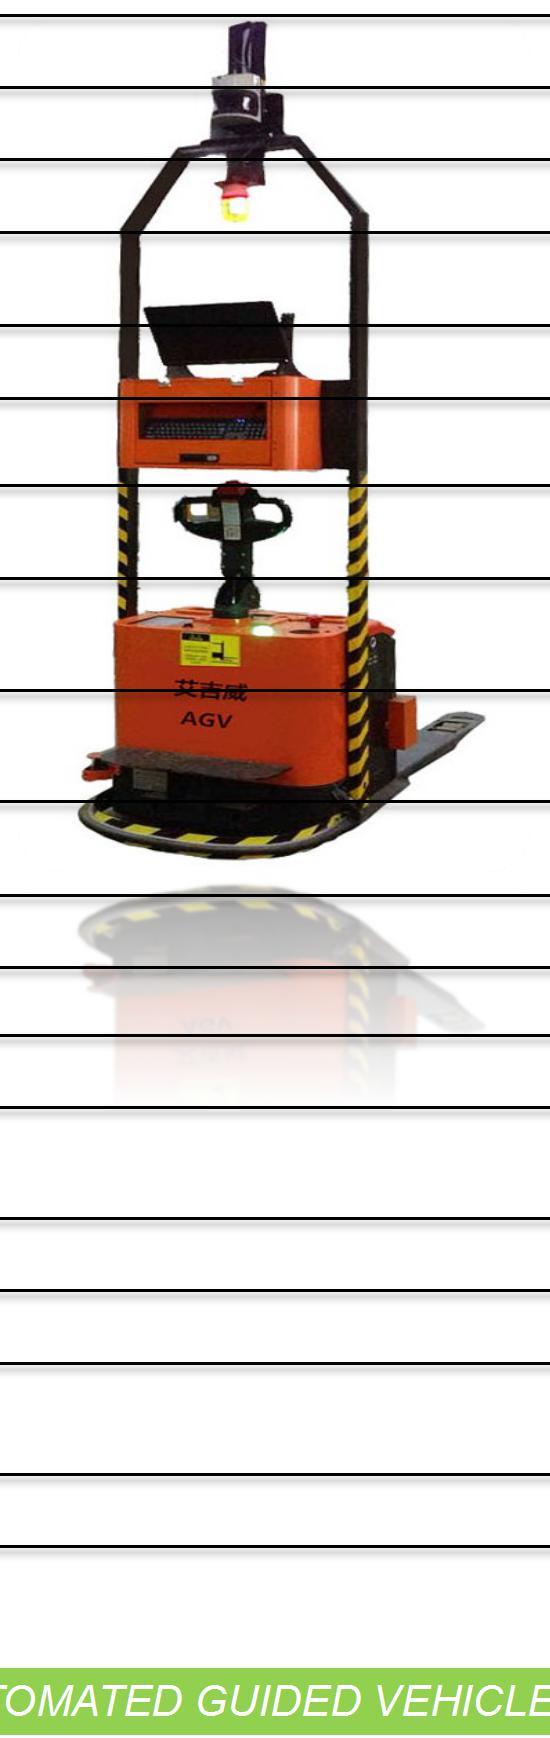 Forklift-YD-AGVX3-ZSR Description : The non-reflector fork type AGV equipped with non reflector laser navigation system developed by AGV Robot Ltd is extremely flexible and intelligent.